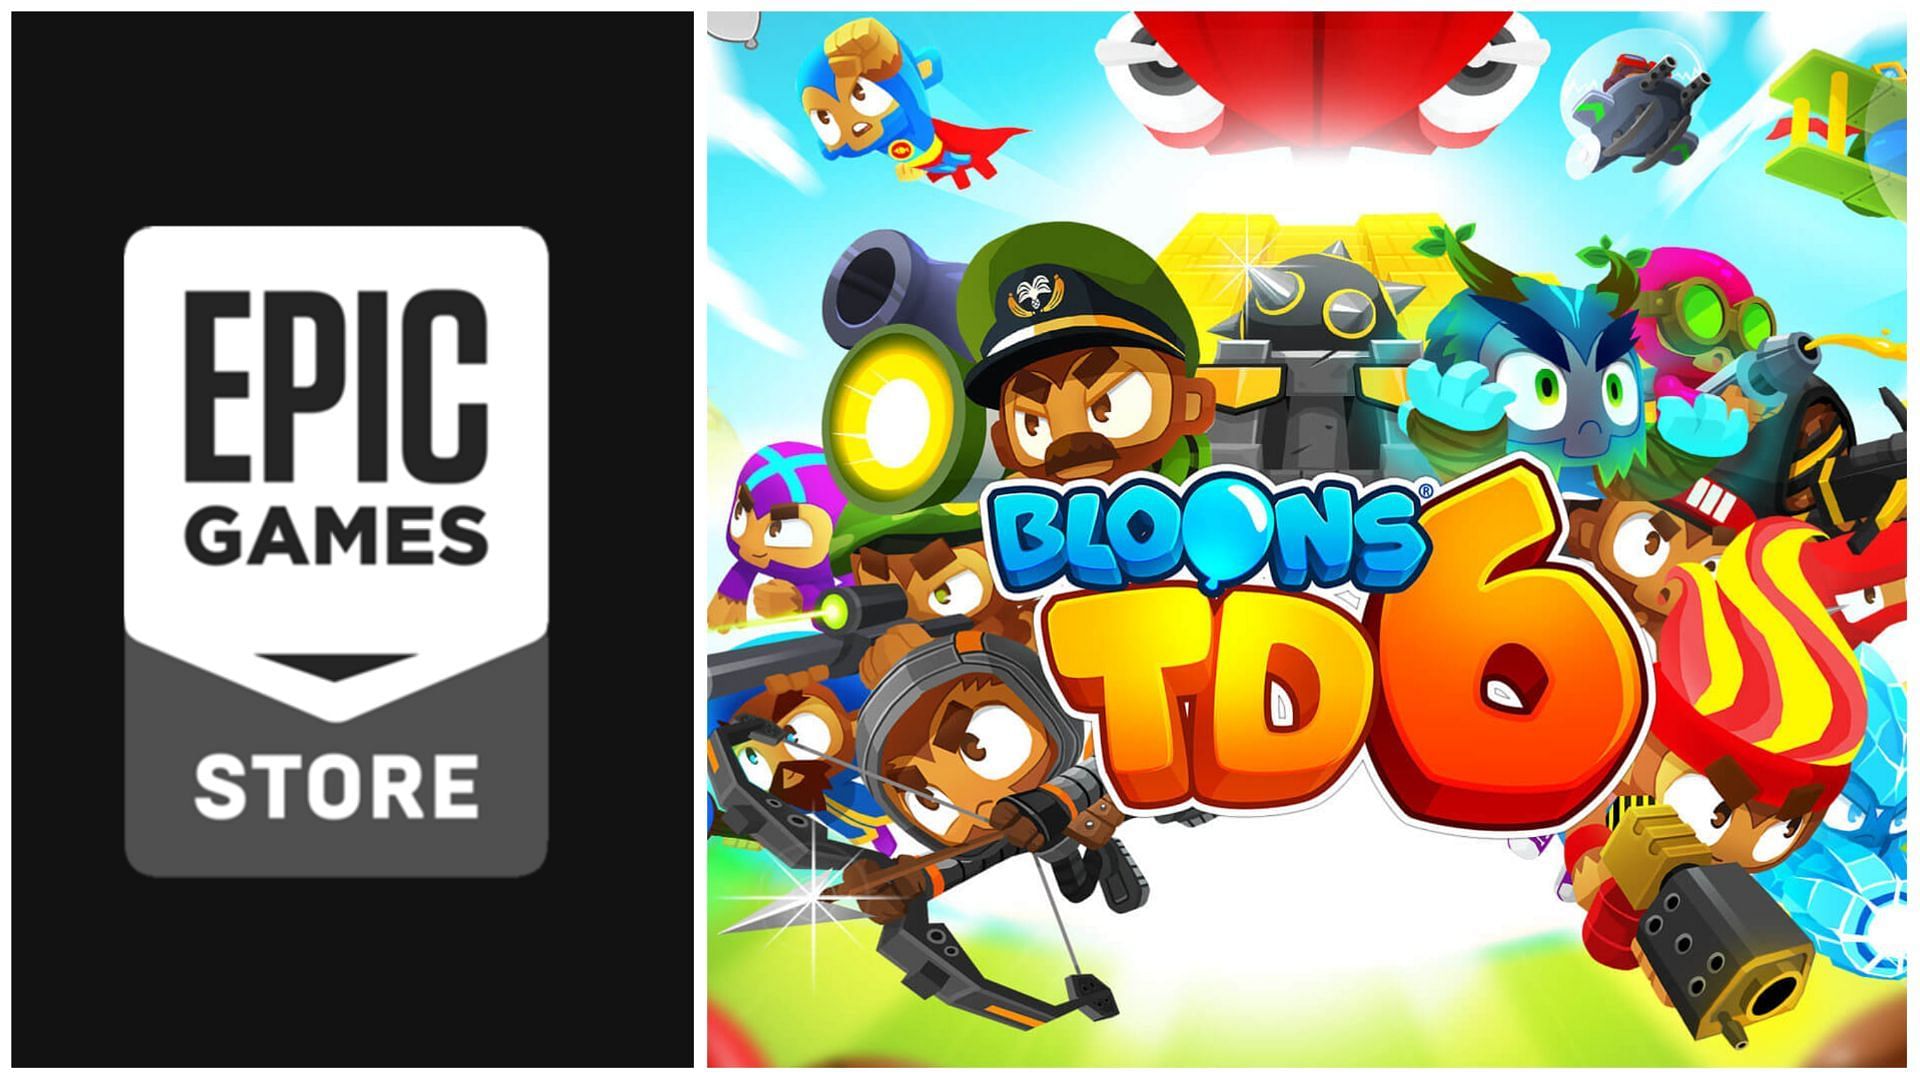 Free games like Bloons tower defense 6 and more every day! #epic #freegames  #bloons #btd6 #free #epicgames, Pupsker, Pupsker · Original audio